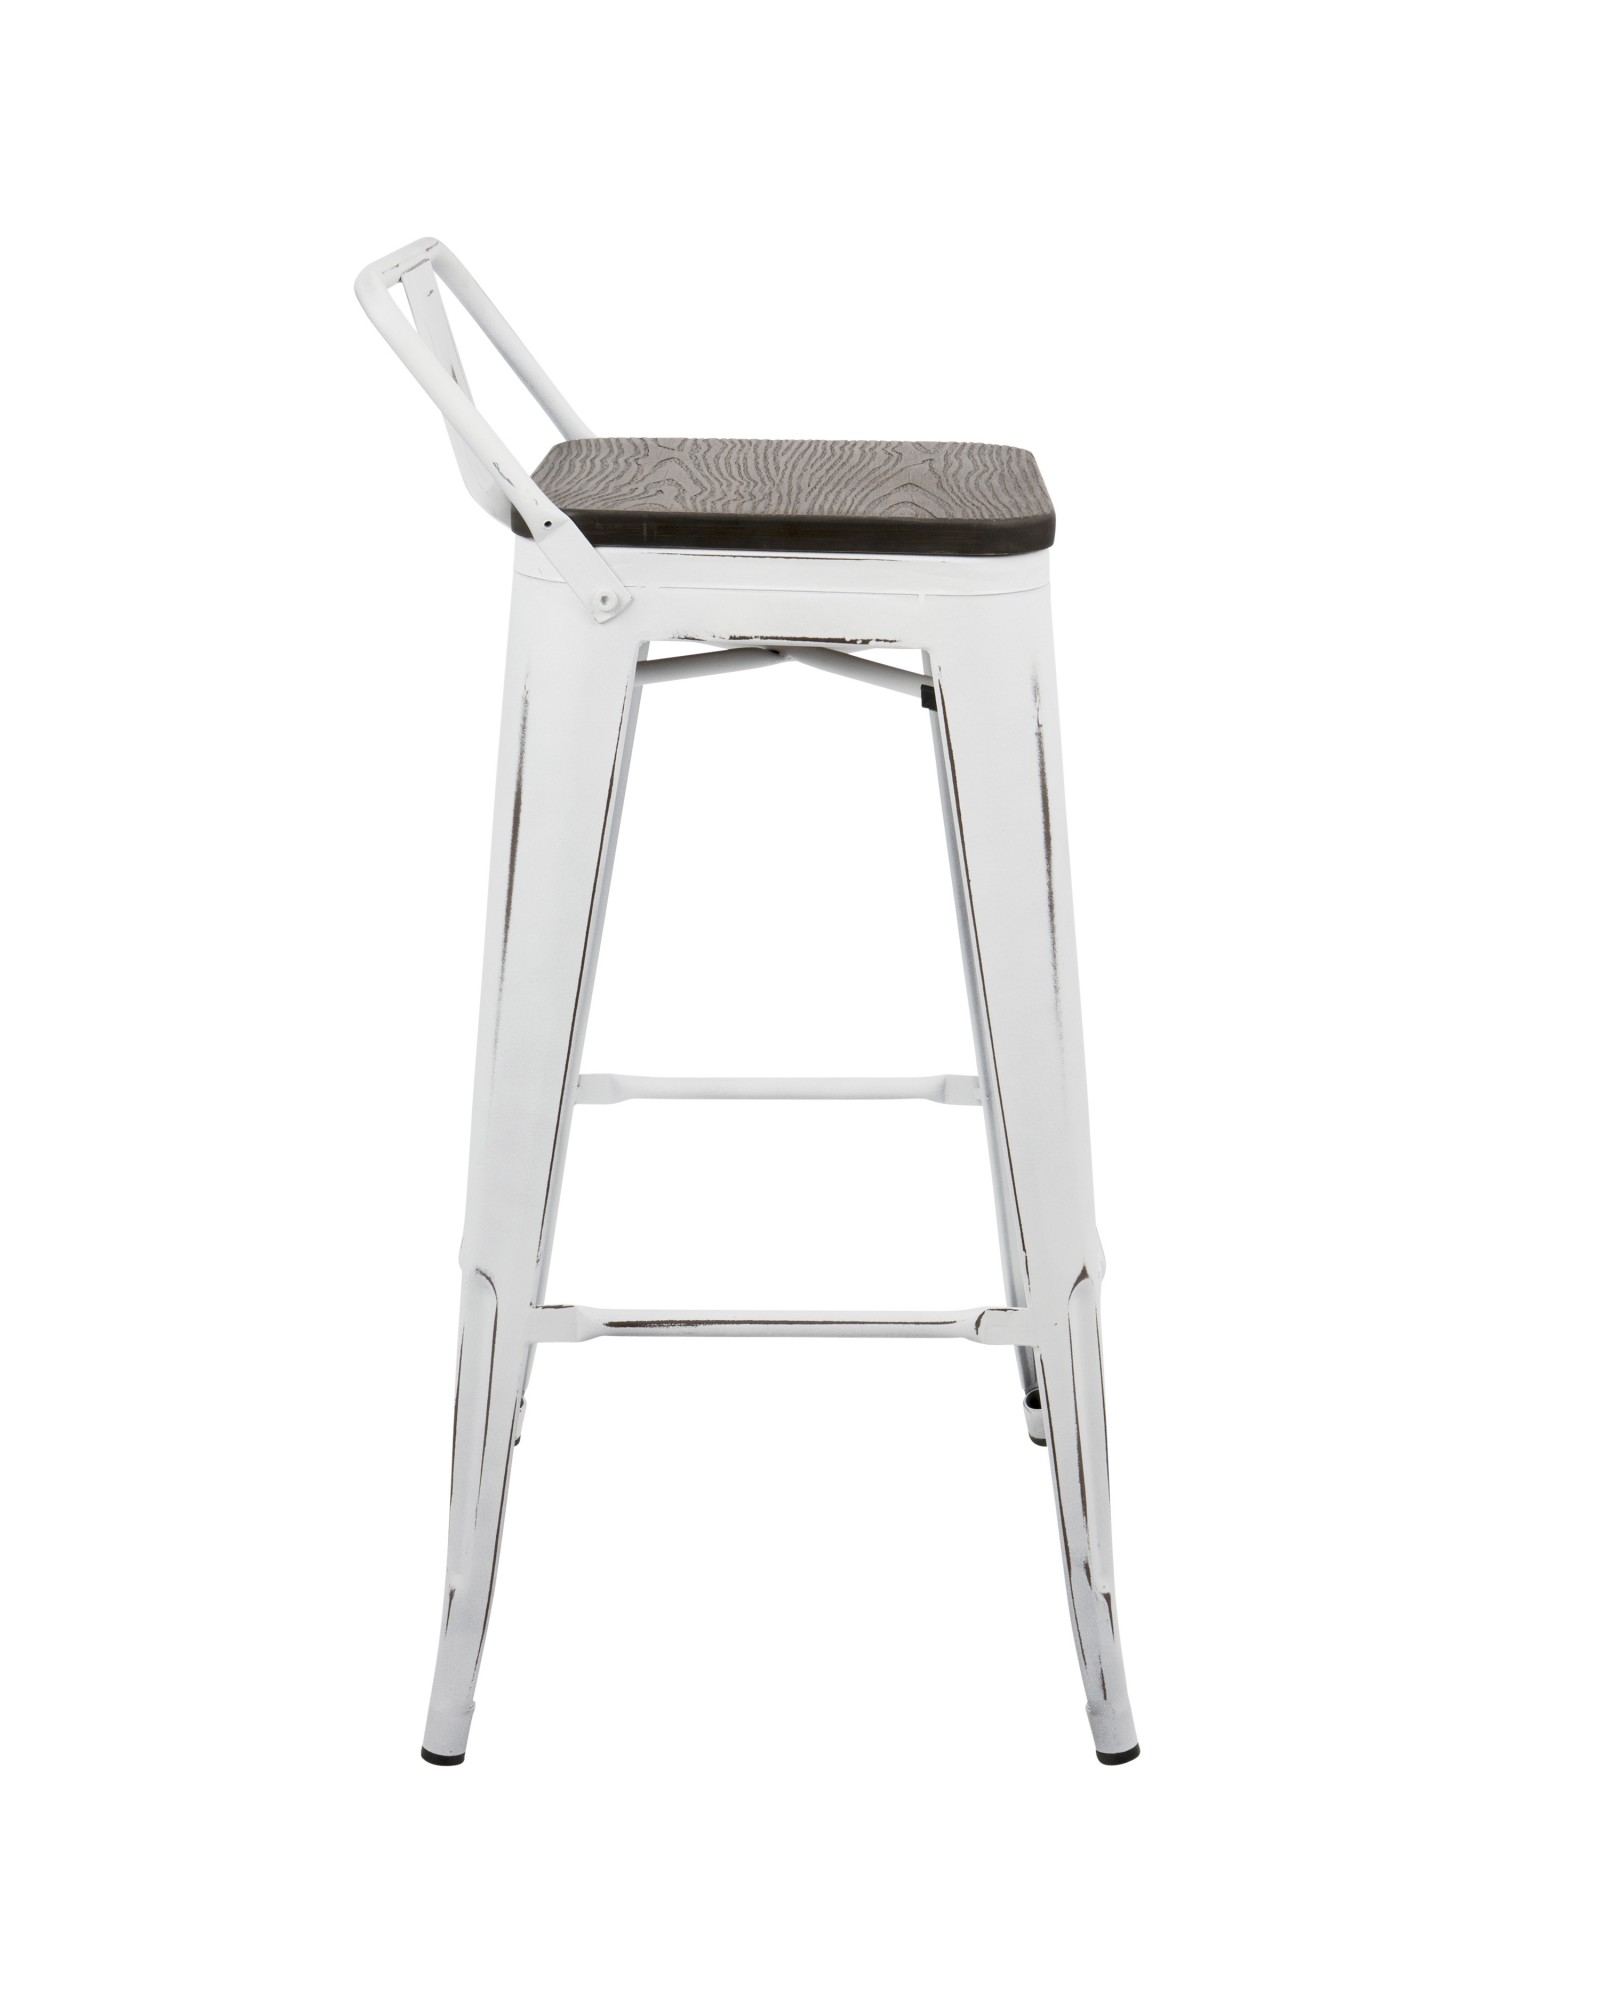 Oregon Industrial Low Back Barstool in Vintage White and Espresso - Set of 2